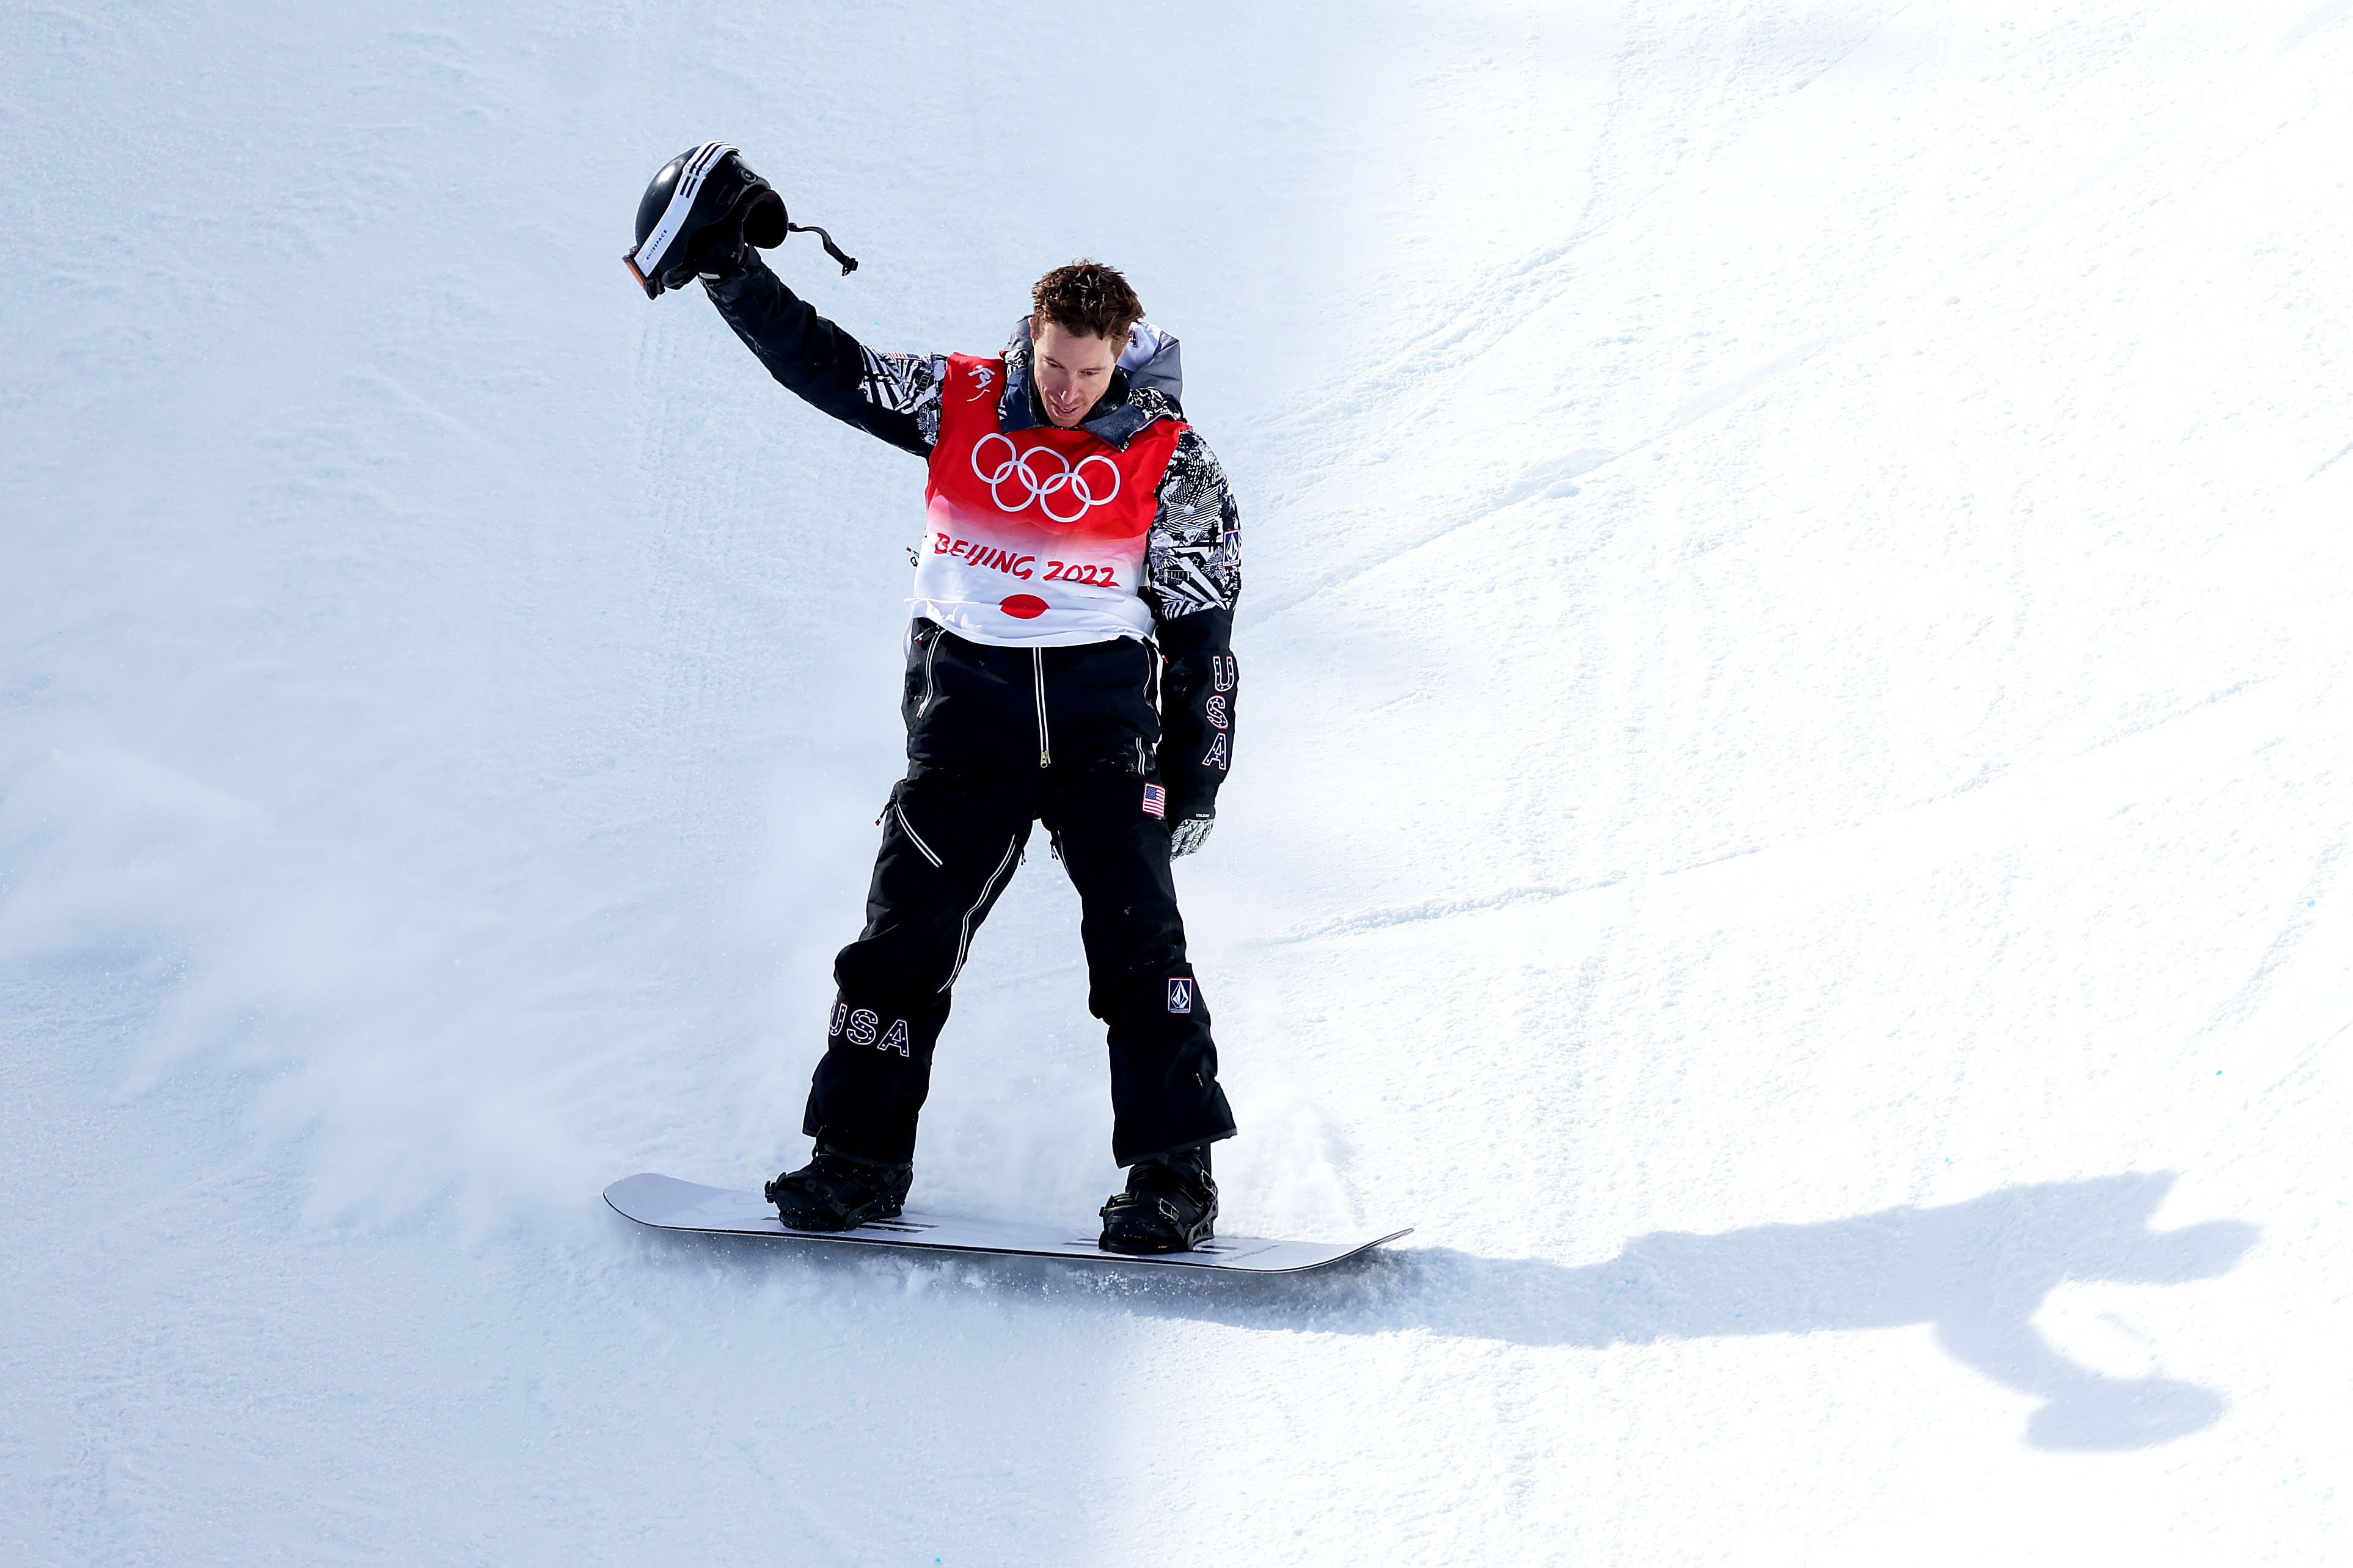 Shaun White the snowboarding icon ponders his voyage, past and future